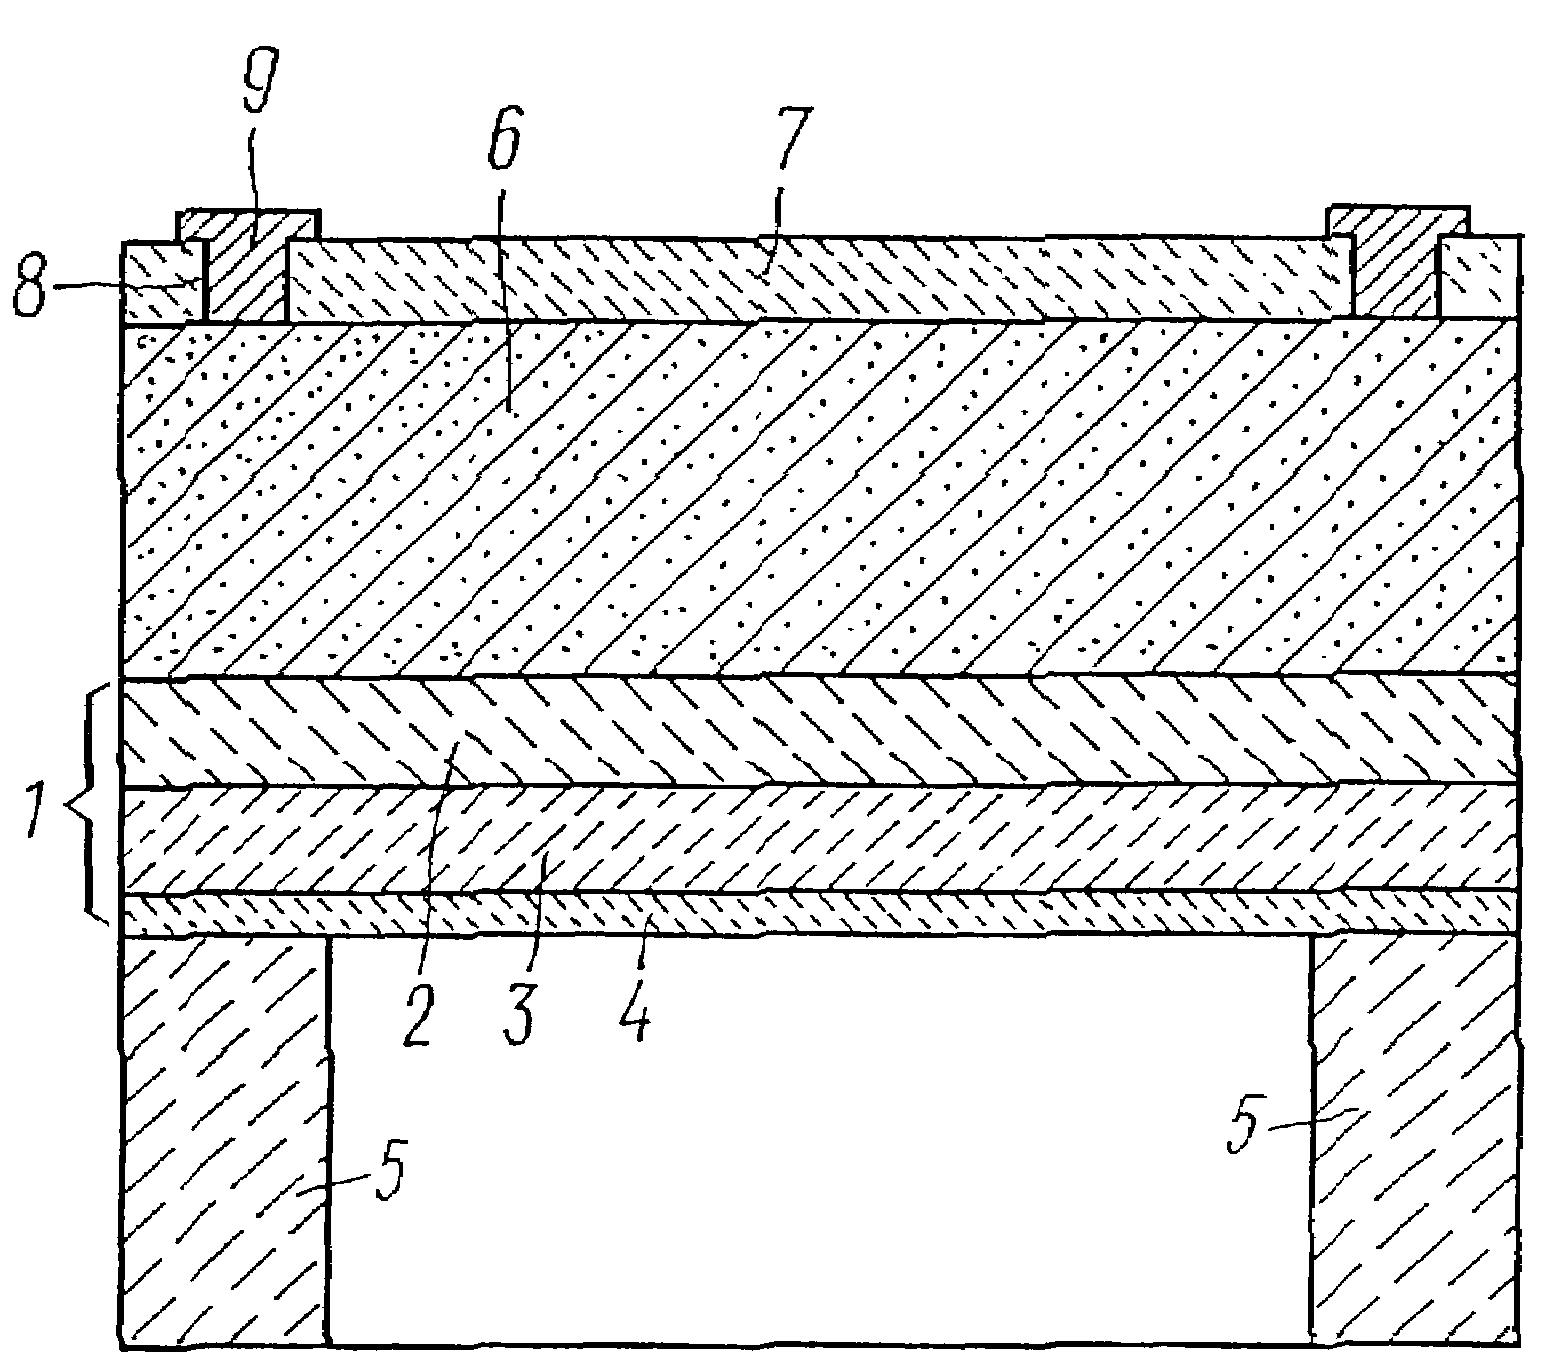 Method for producing a conducting doped diamond-like nanocomposite film and a conducting doped diamond-like nanocomposite film